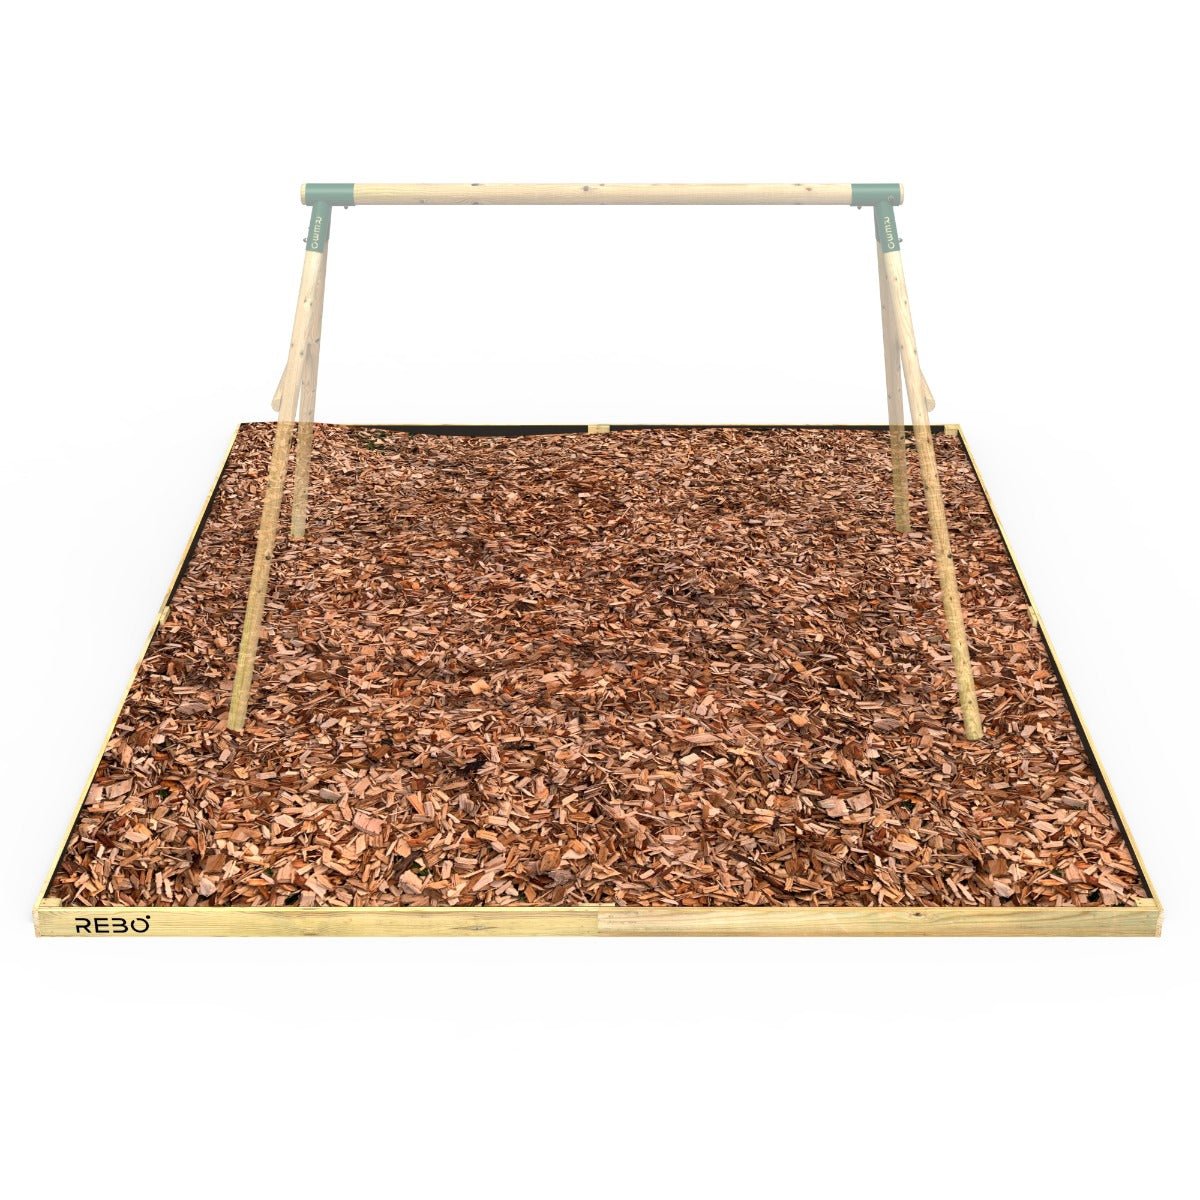 Rebo Safety Play Area Protective Bark Wood Chip Kit - 4M x 4M